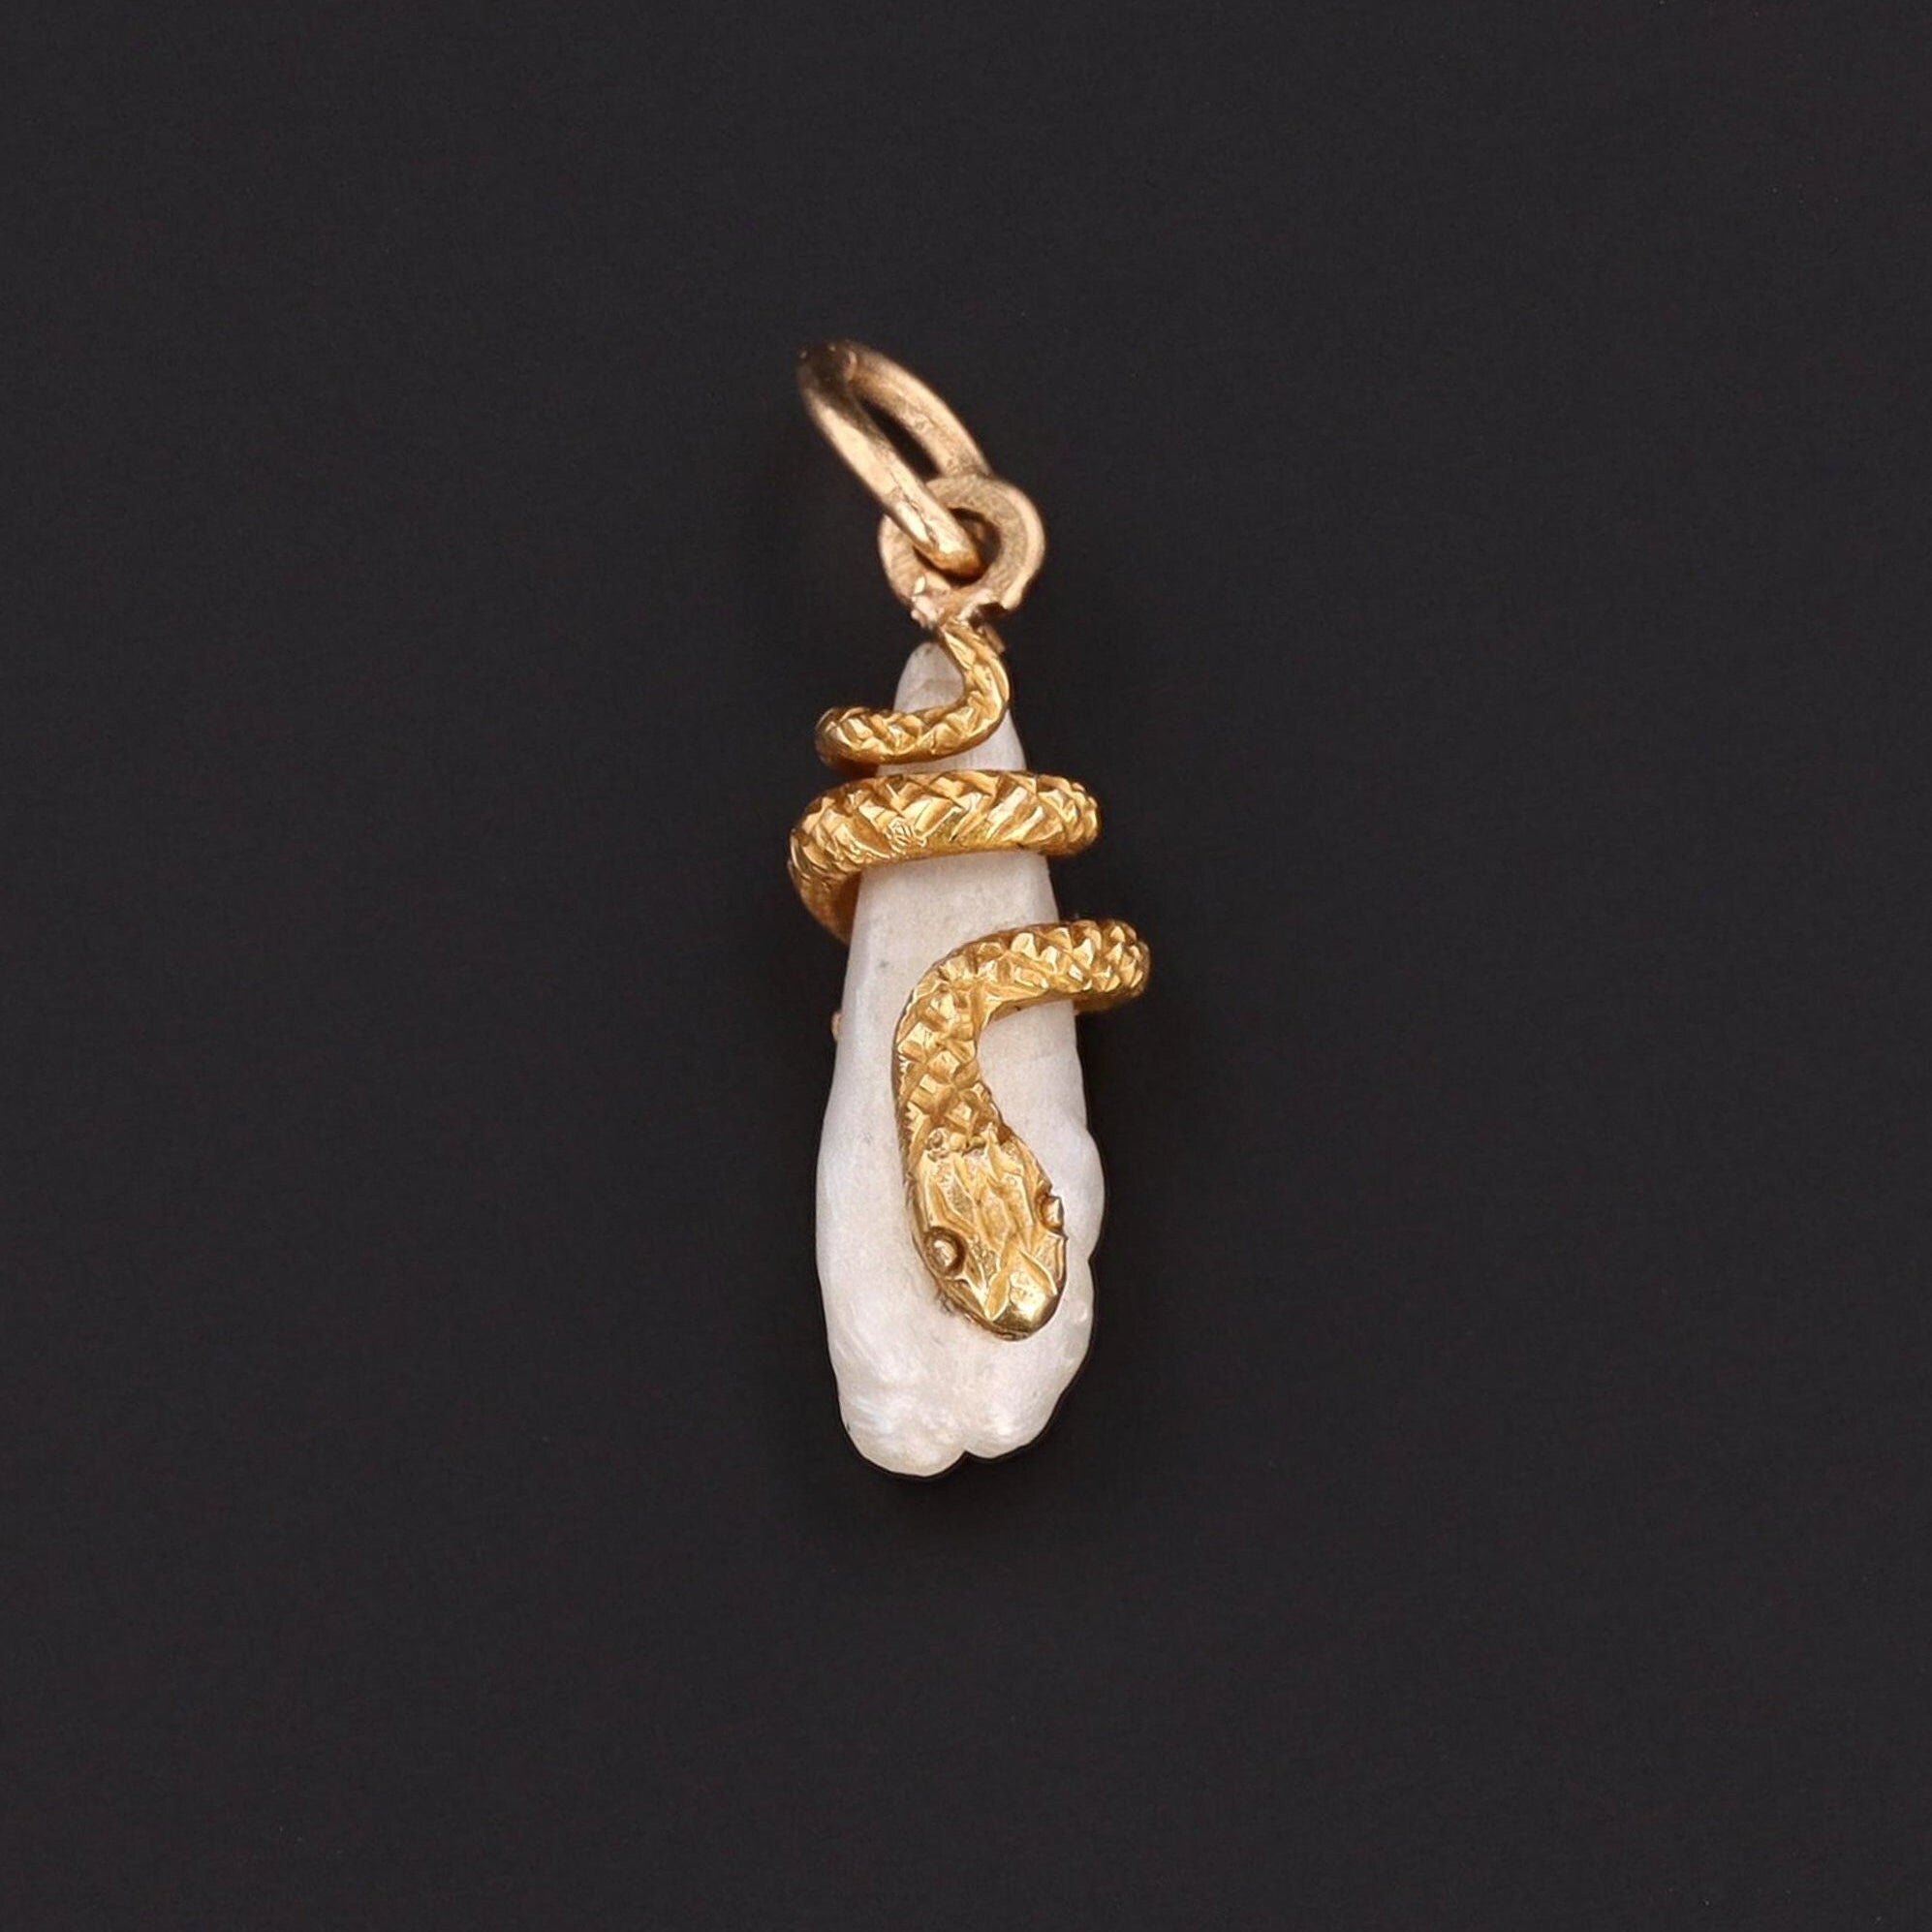 Antique Pearl Snake Conversion Charm of 14k Gold